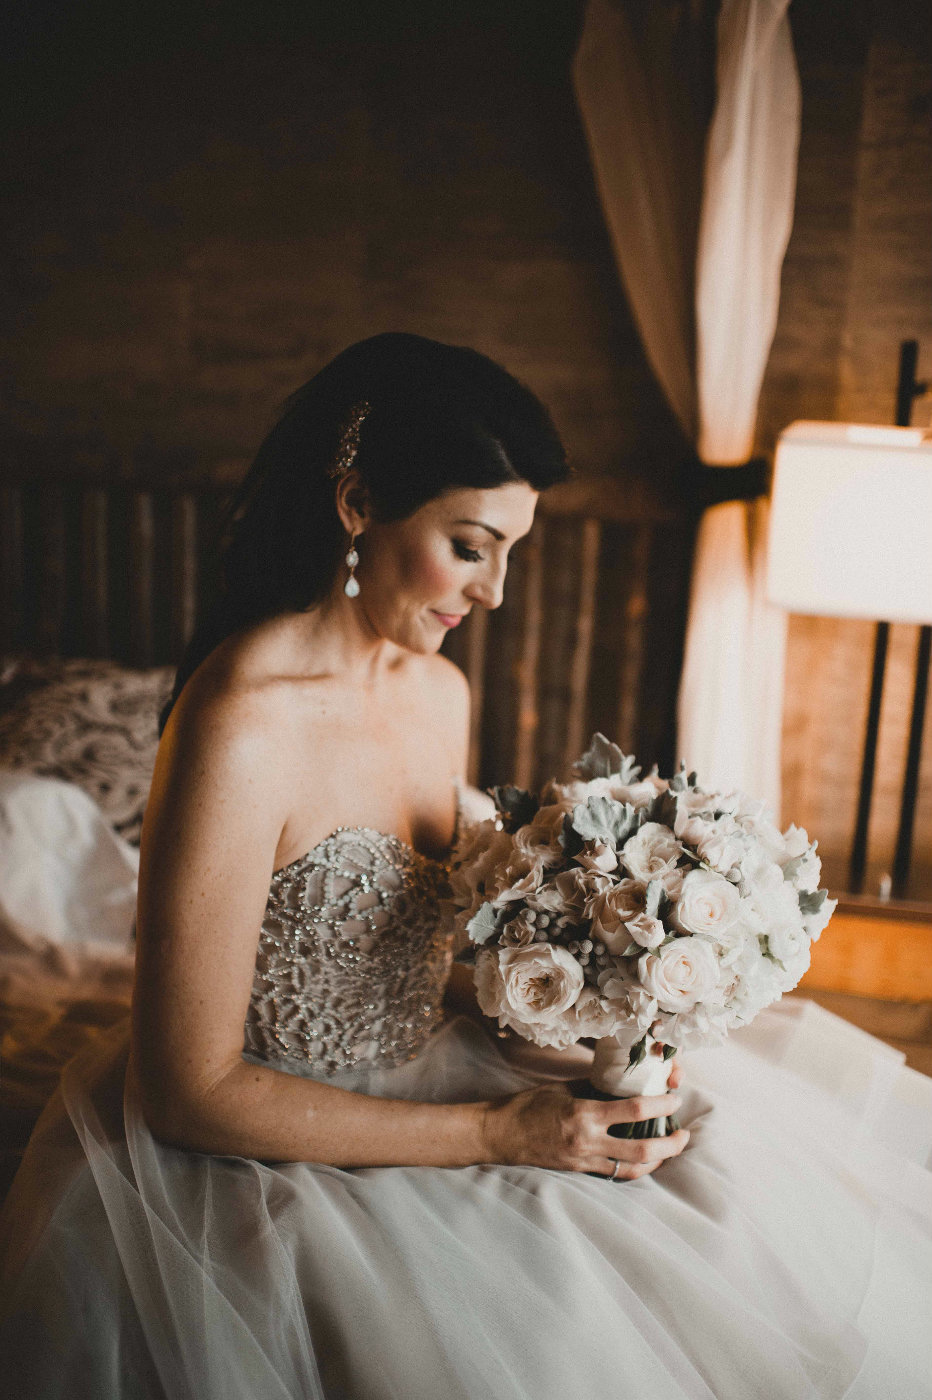 Lovely off white wedding dress complements the white and silver bridal bouquet perfectly.